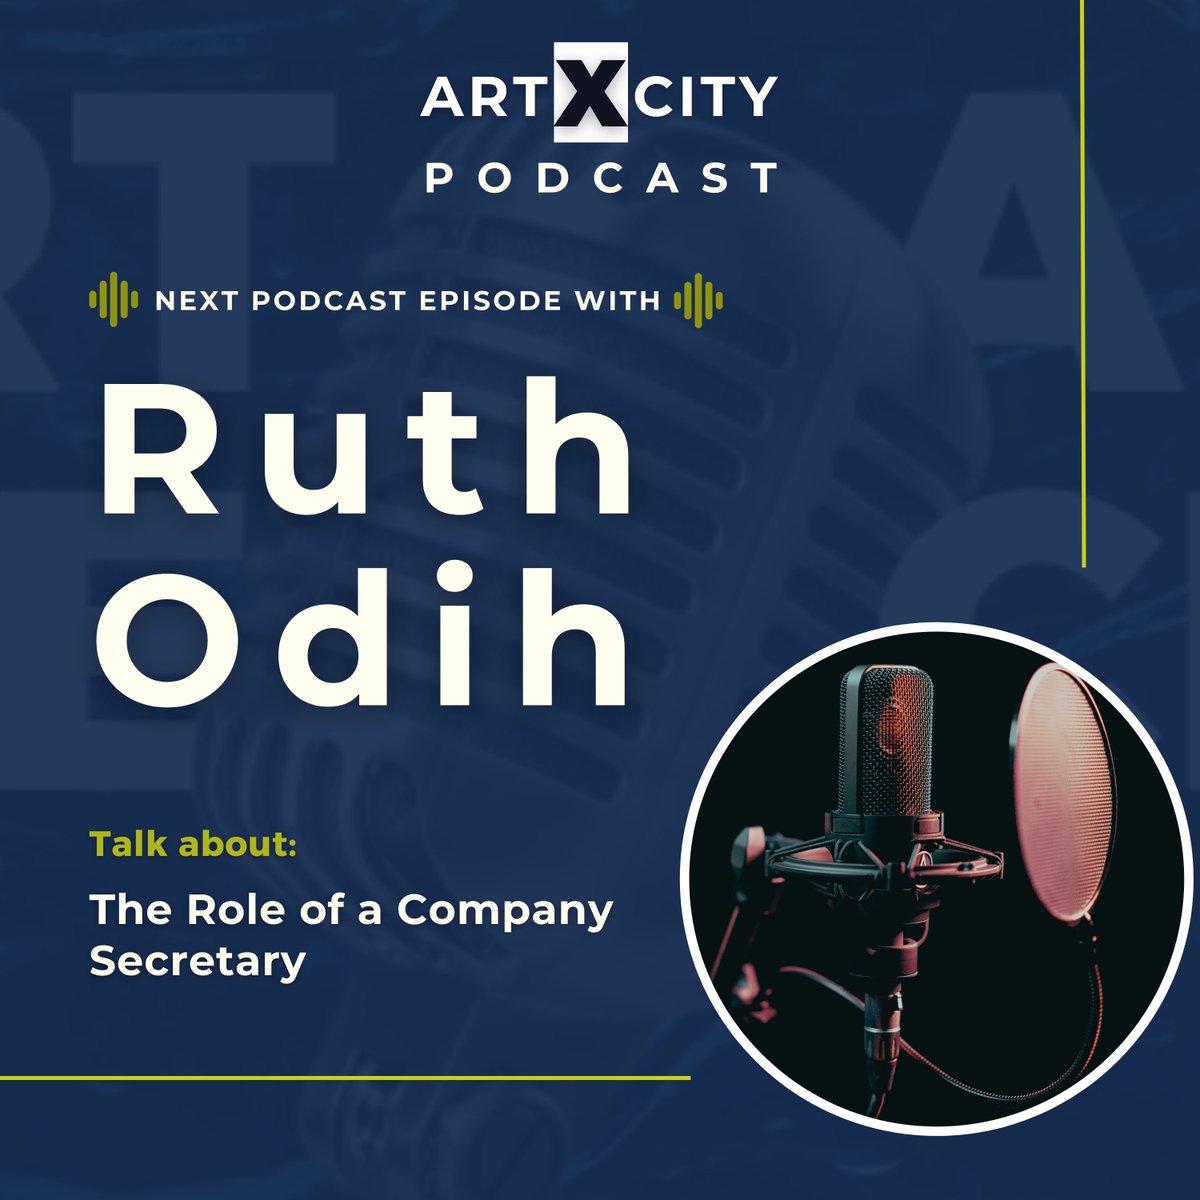 Have you listened to our podcast yet? This week’s episode features Ruth Odih, Company Secretary and key member of the Women’s Company Secretary Circle.

Listen here bit.ly/3v7cjme or head to the TEA website for more information!

#womeninbusinessuk #podcast #finlit